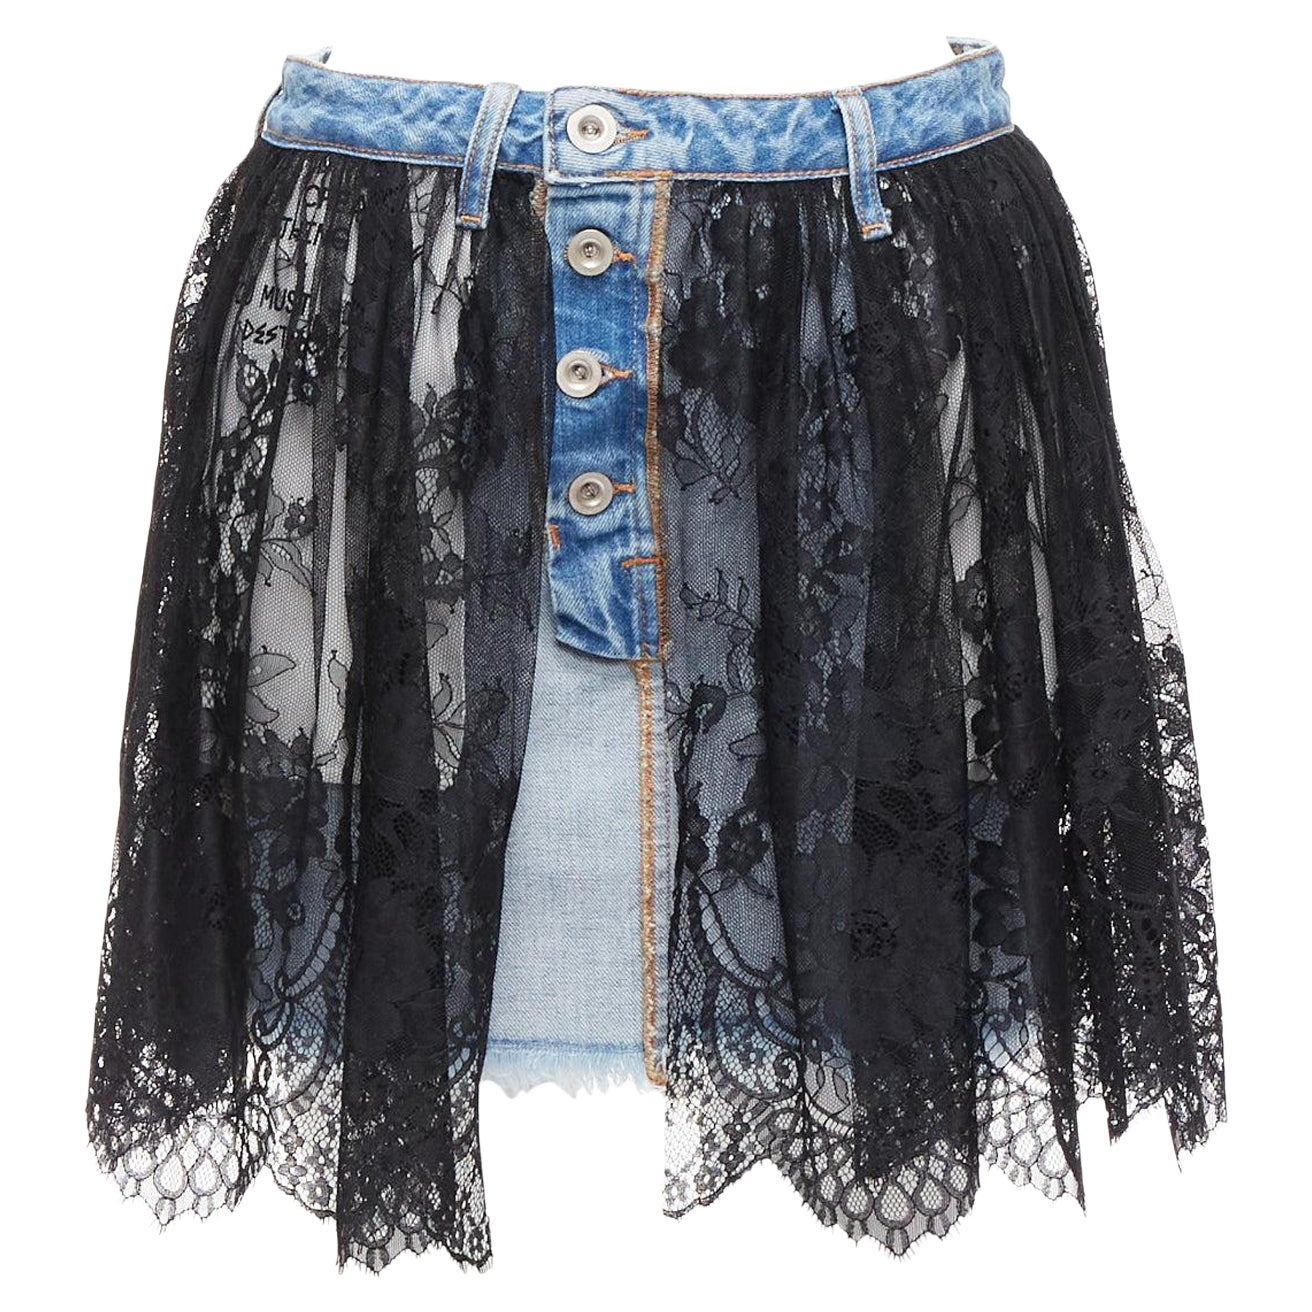 UNRAVEL PROJECT black floral lace ruffle blue denim inside out skirt 25" For Sale